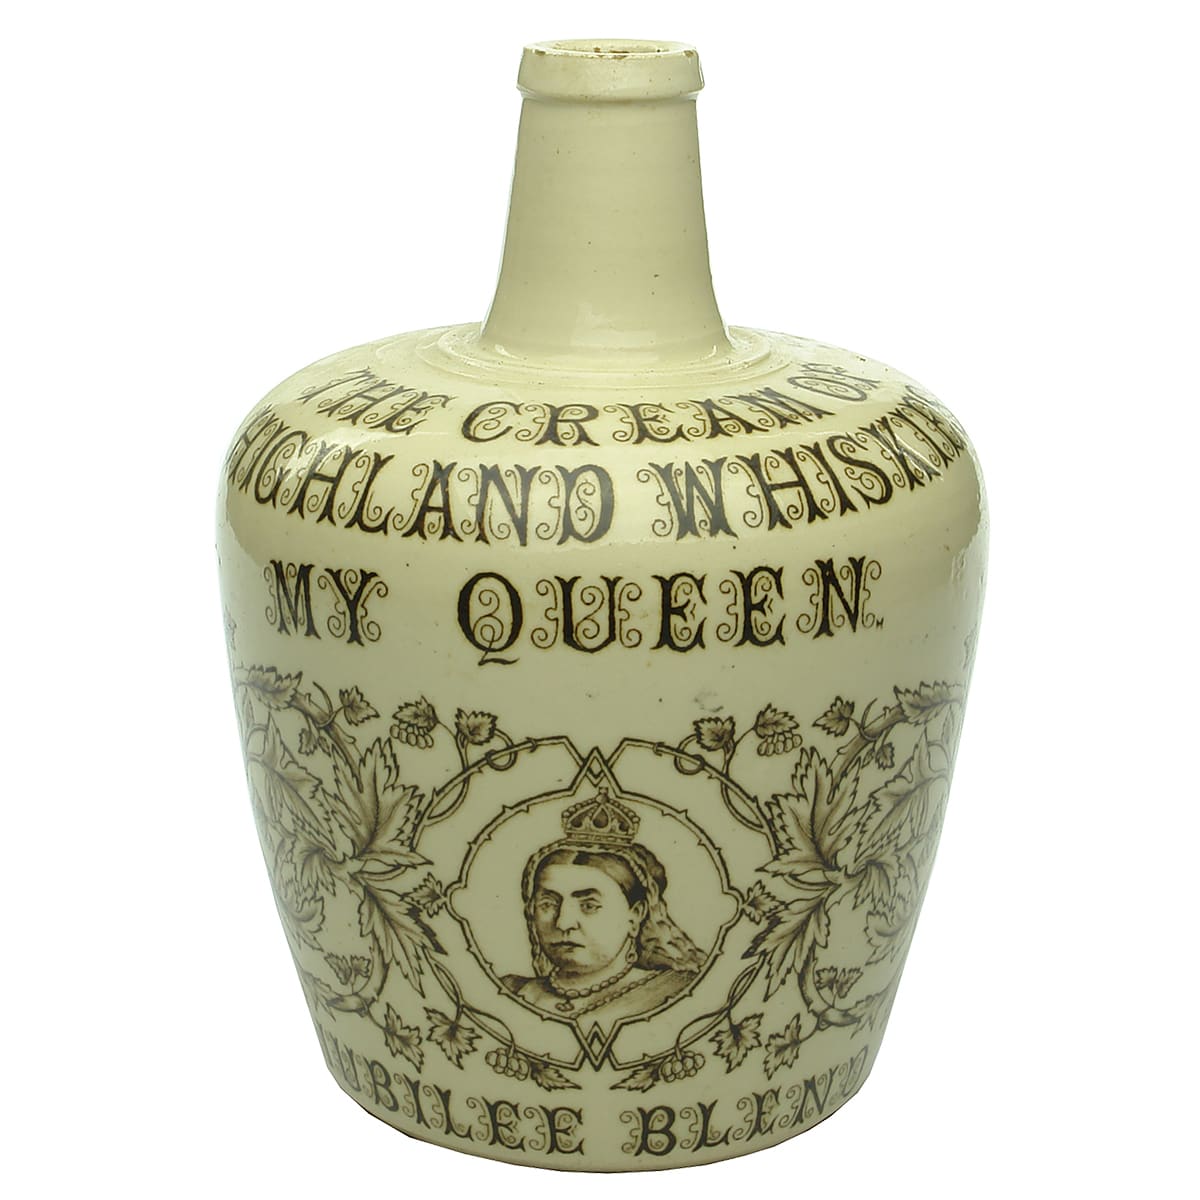 Whisky Jug. My Queen. Jubilee Blend. Thom & Cameron, Glasgow. All White with Sepia Print.